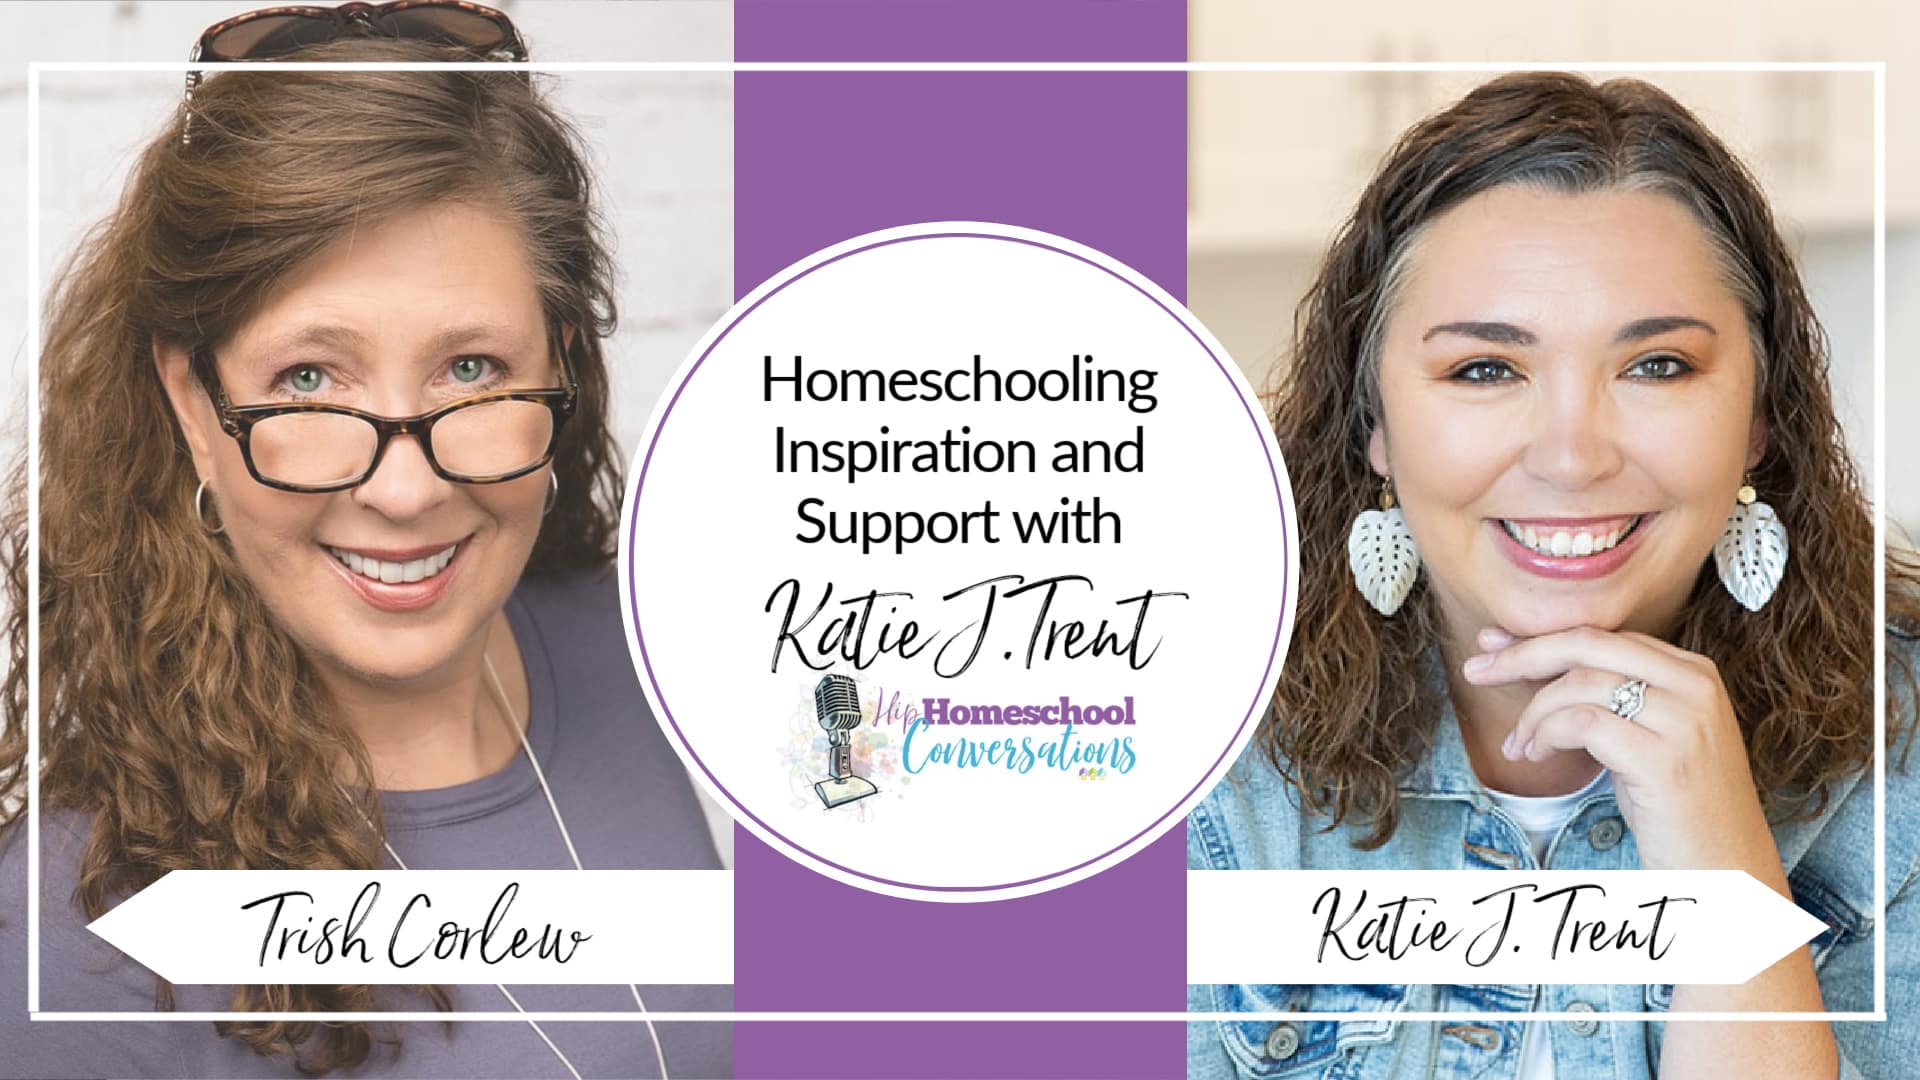 Are you already homeschooling and you’re tired of defending that decision? Maybe you just need a reminder that homeschooling is worth the time and effort. If you’re considering classical homeschooling, you’ll find helpful information as well. Whatever your situation, Katie J. Trent has words of wisdom for you!